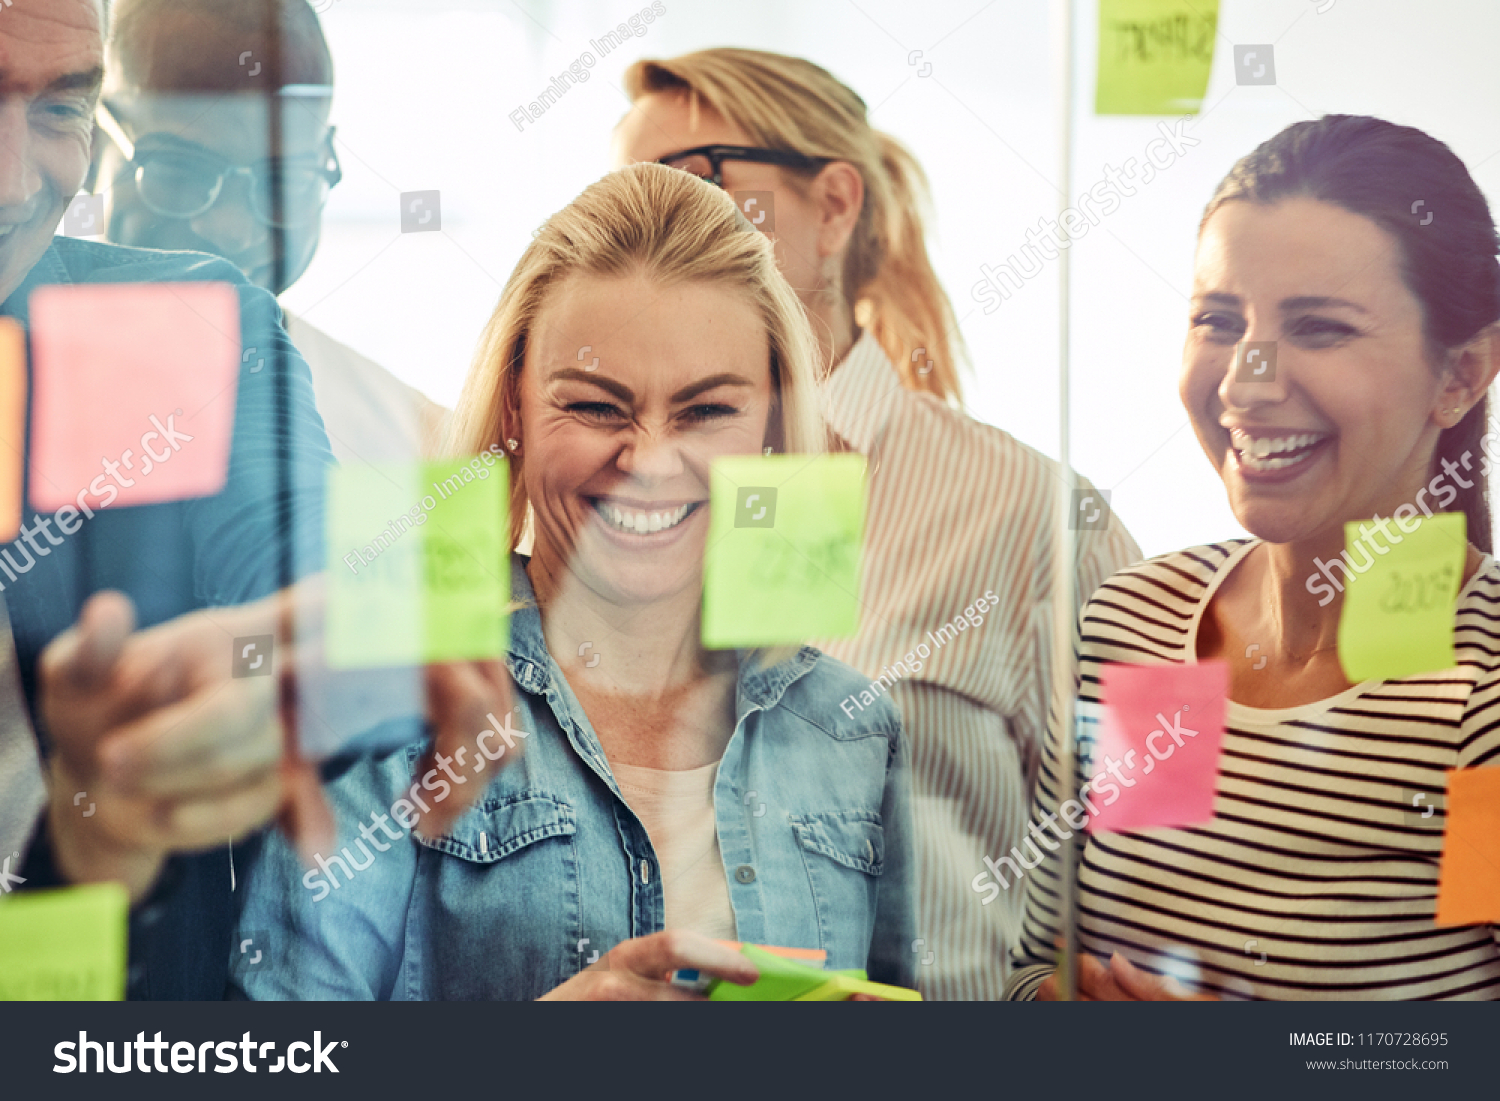 Diverse group of businesspeople laughing while standing in an office brainstorming together with sticky notes on a glass wall #1170728695